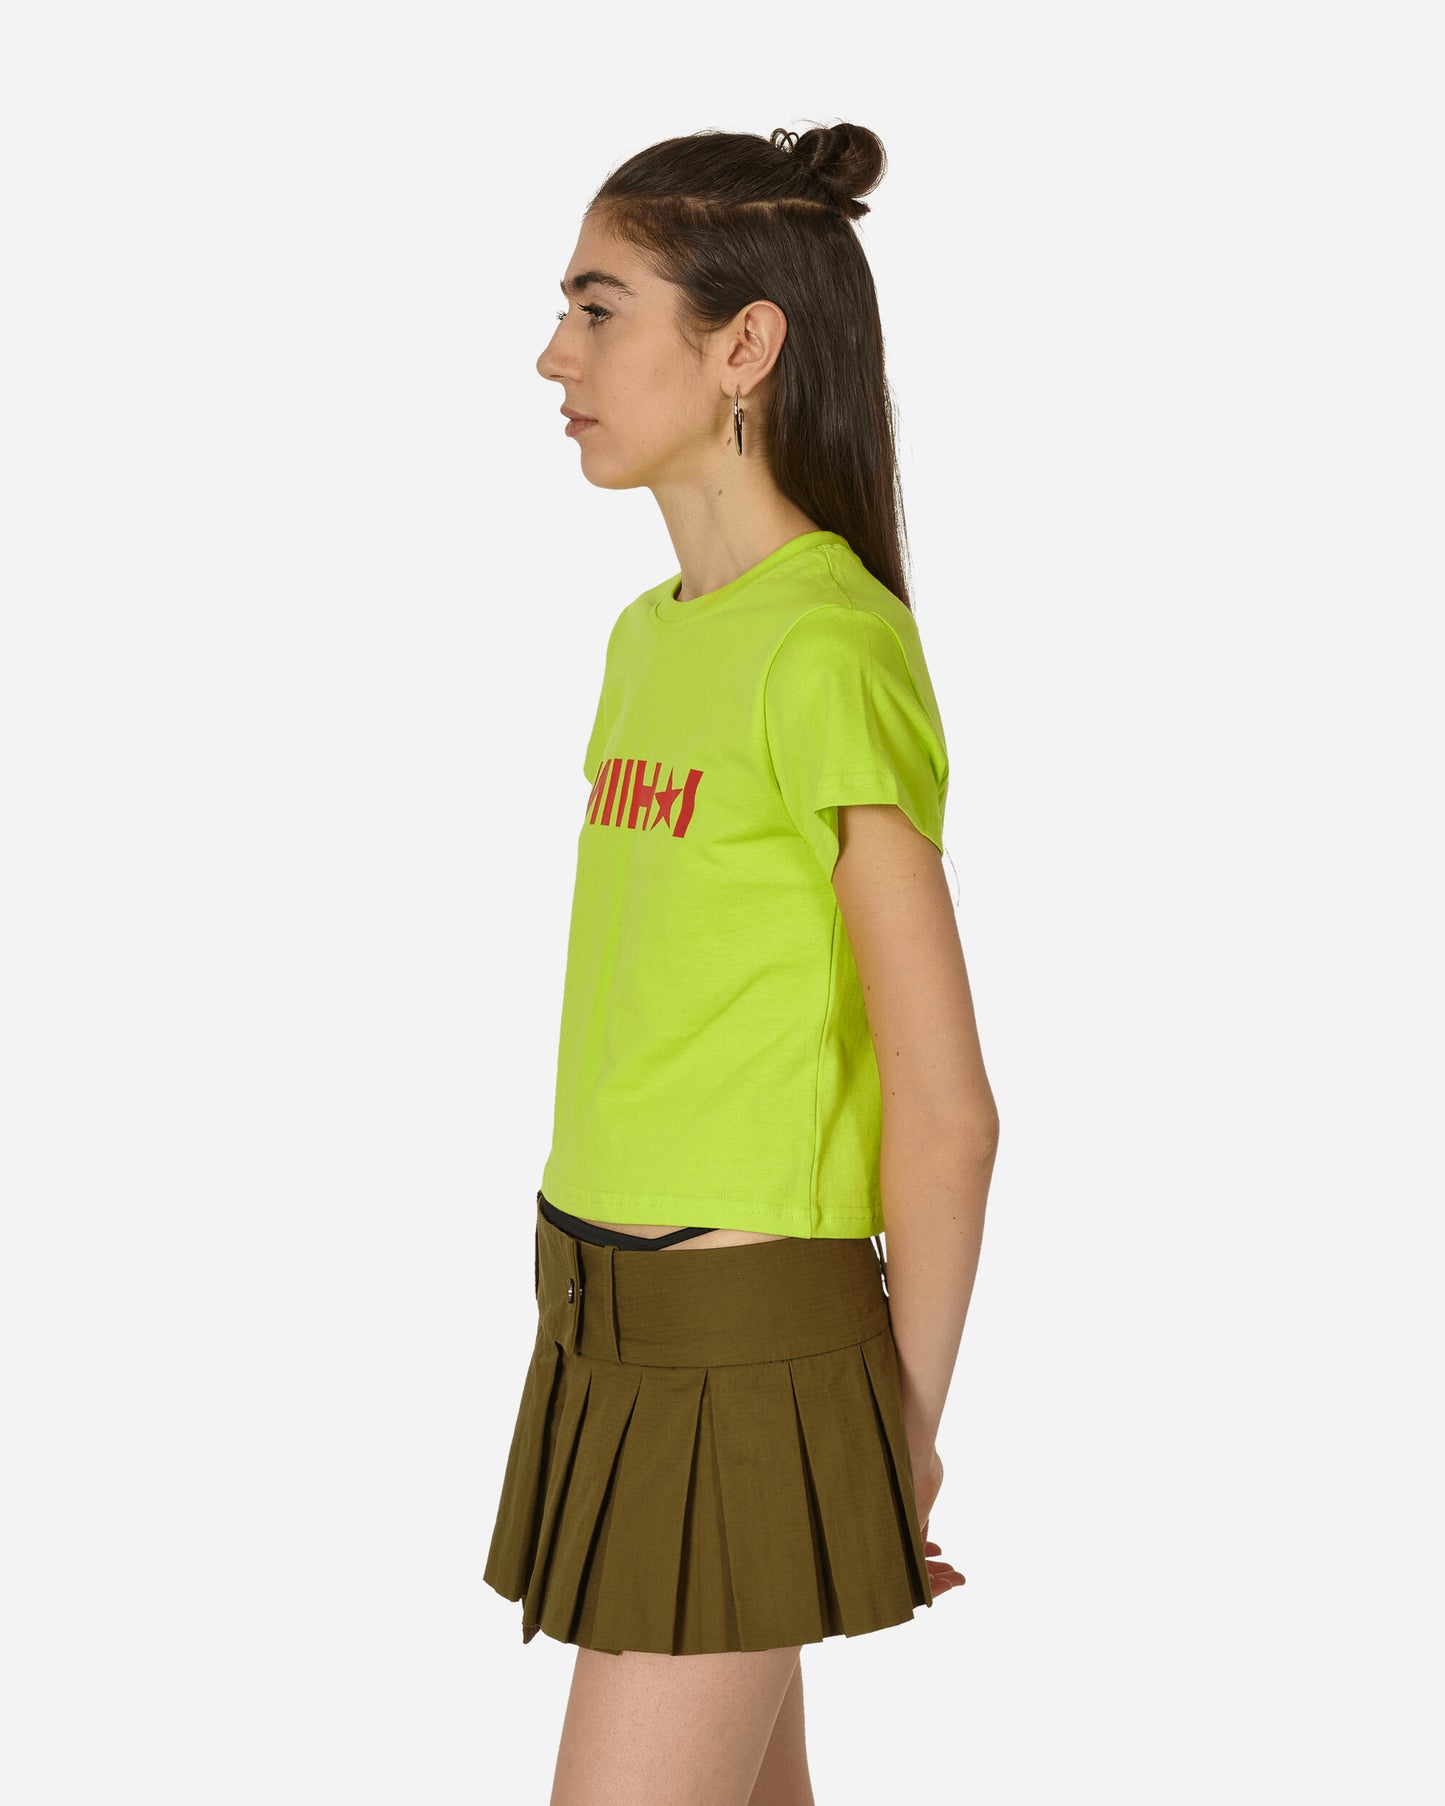 Nii Hai Wmns High Star Baby Tee In Neon Yellow Yellow T-Shirts Cropped TPS-HSB YLW